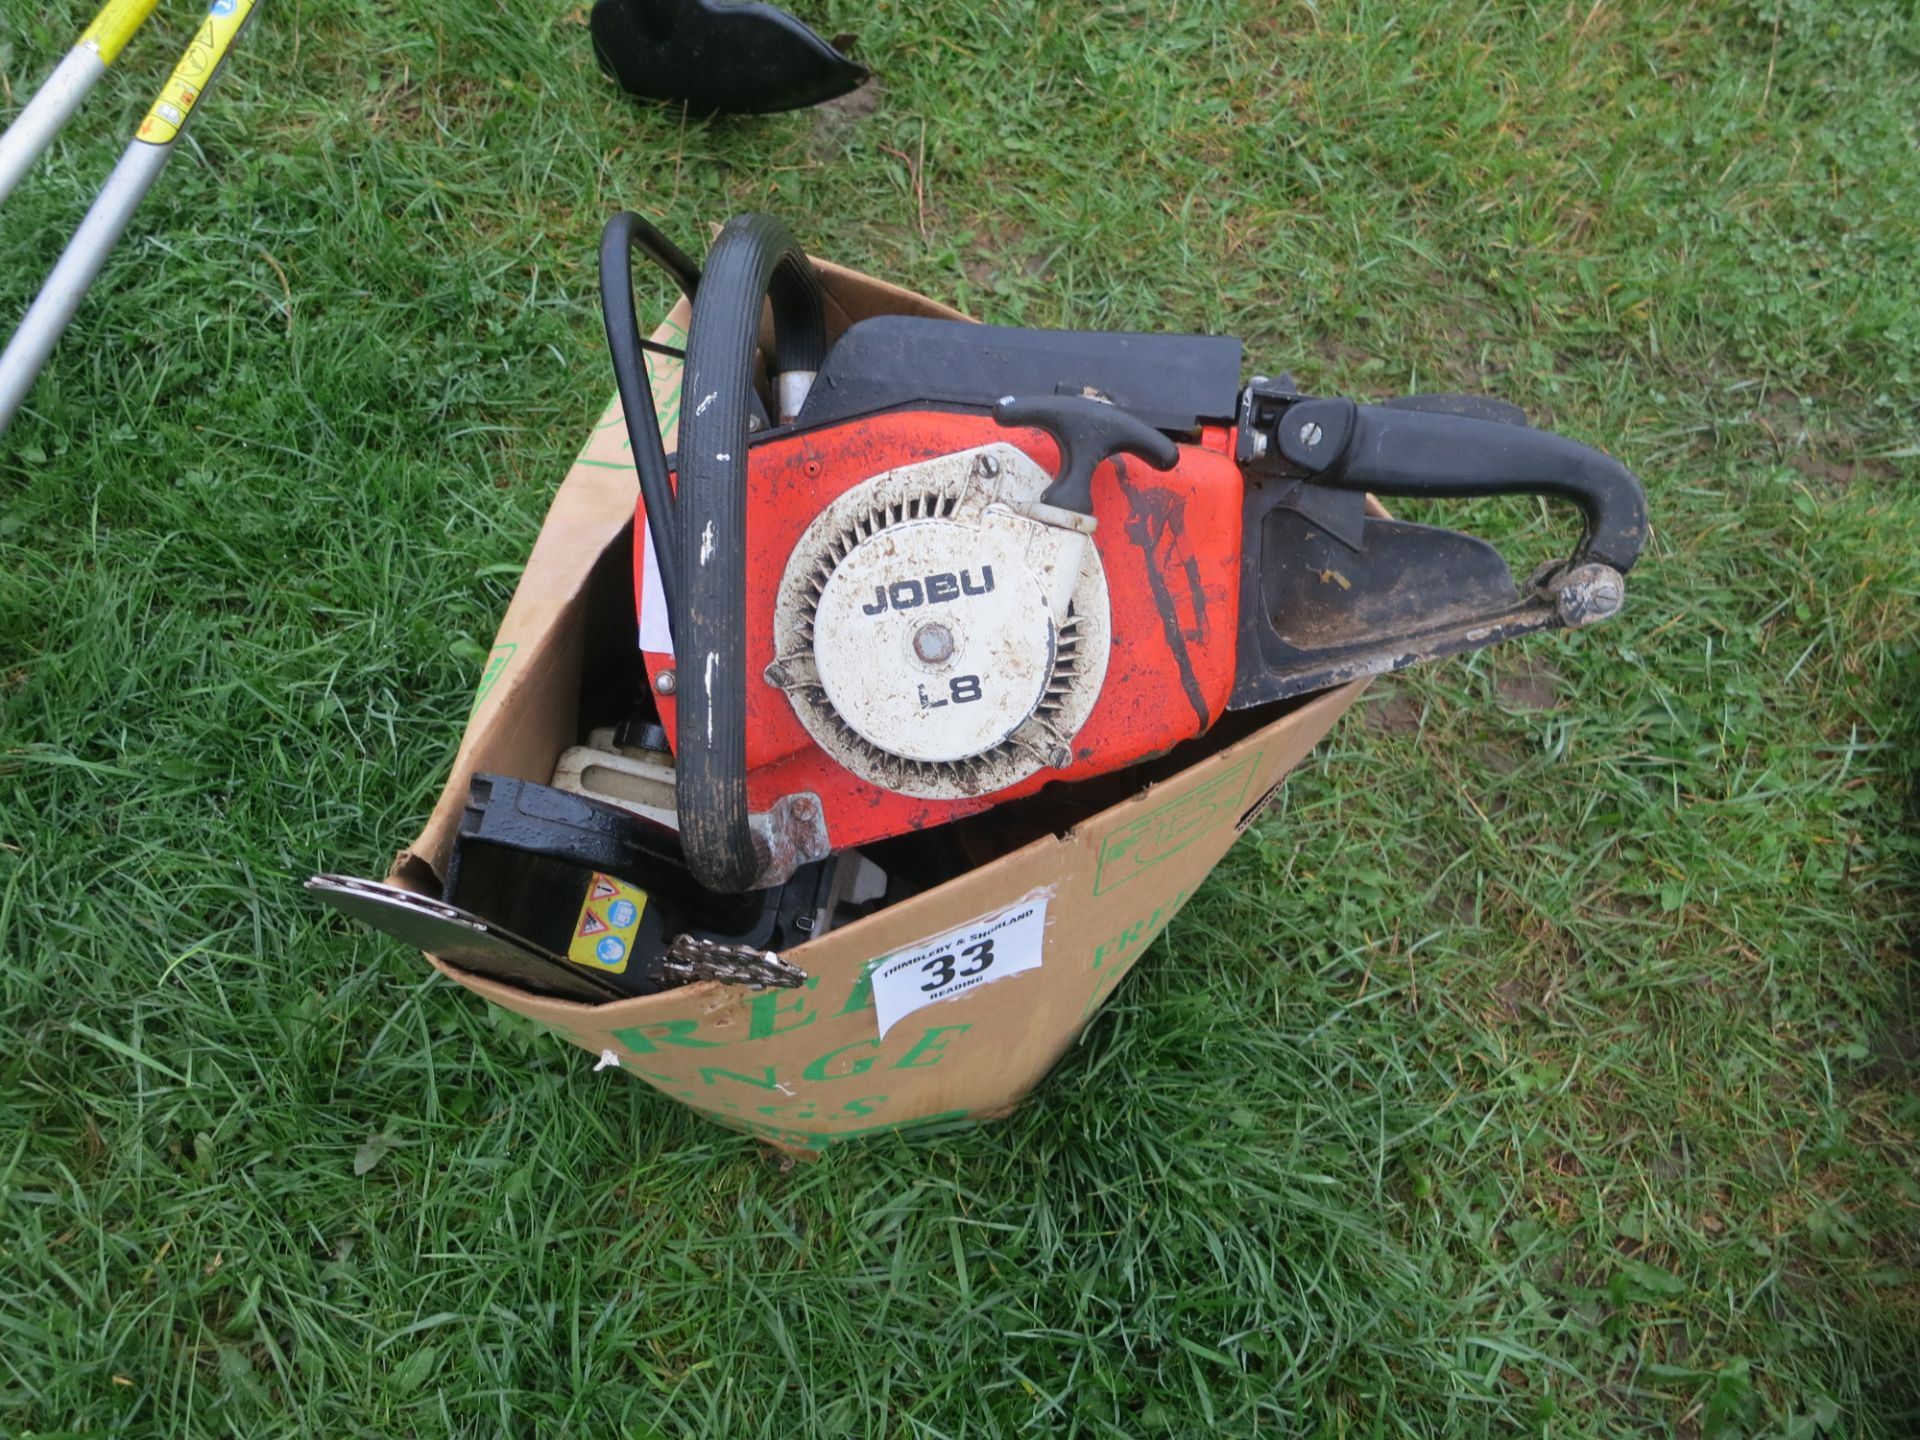 Stihl chain saw in box and one other